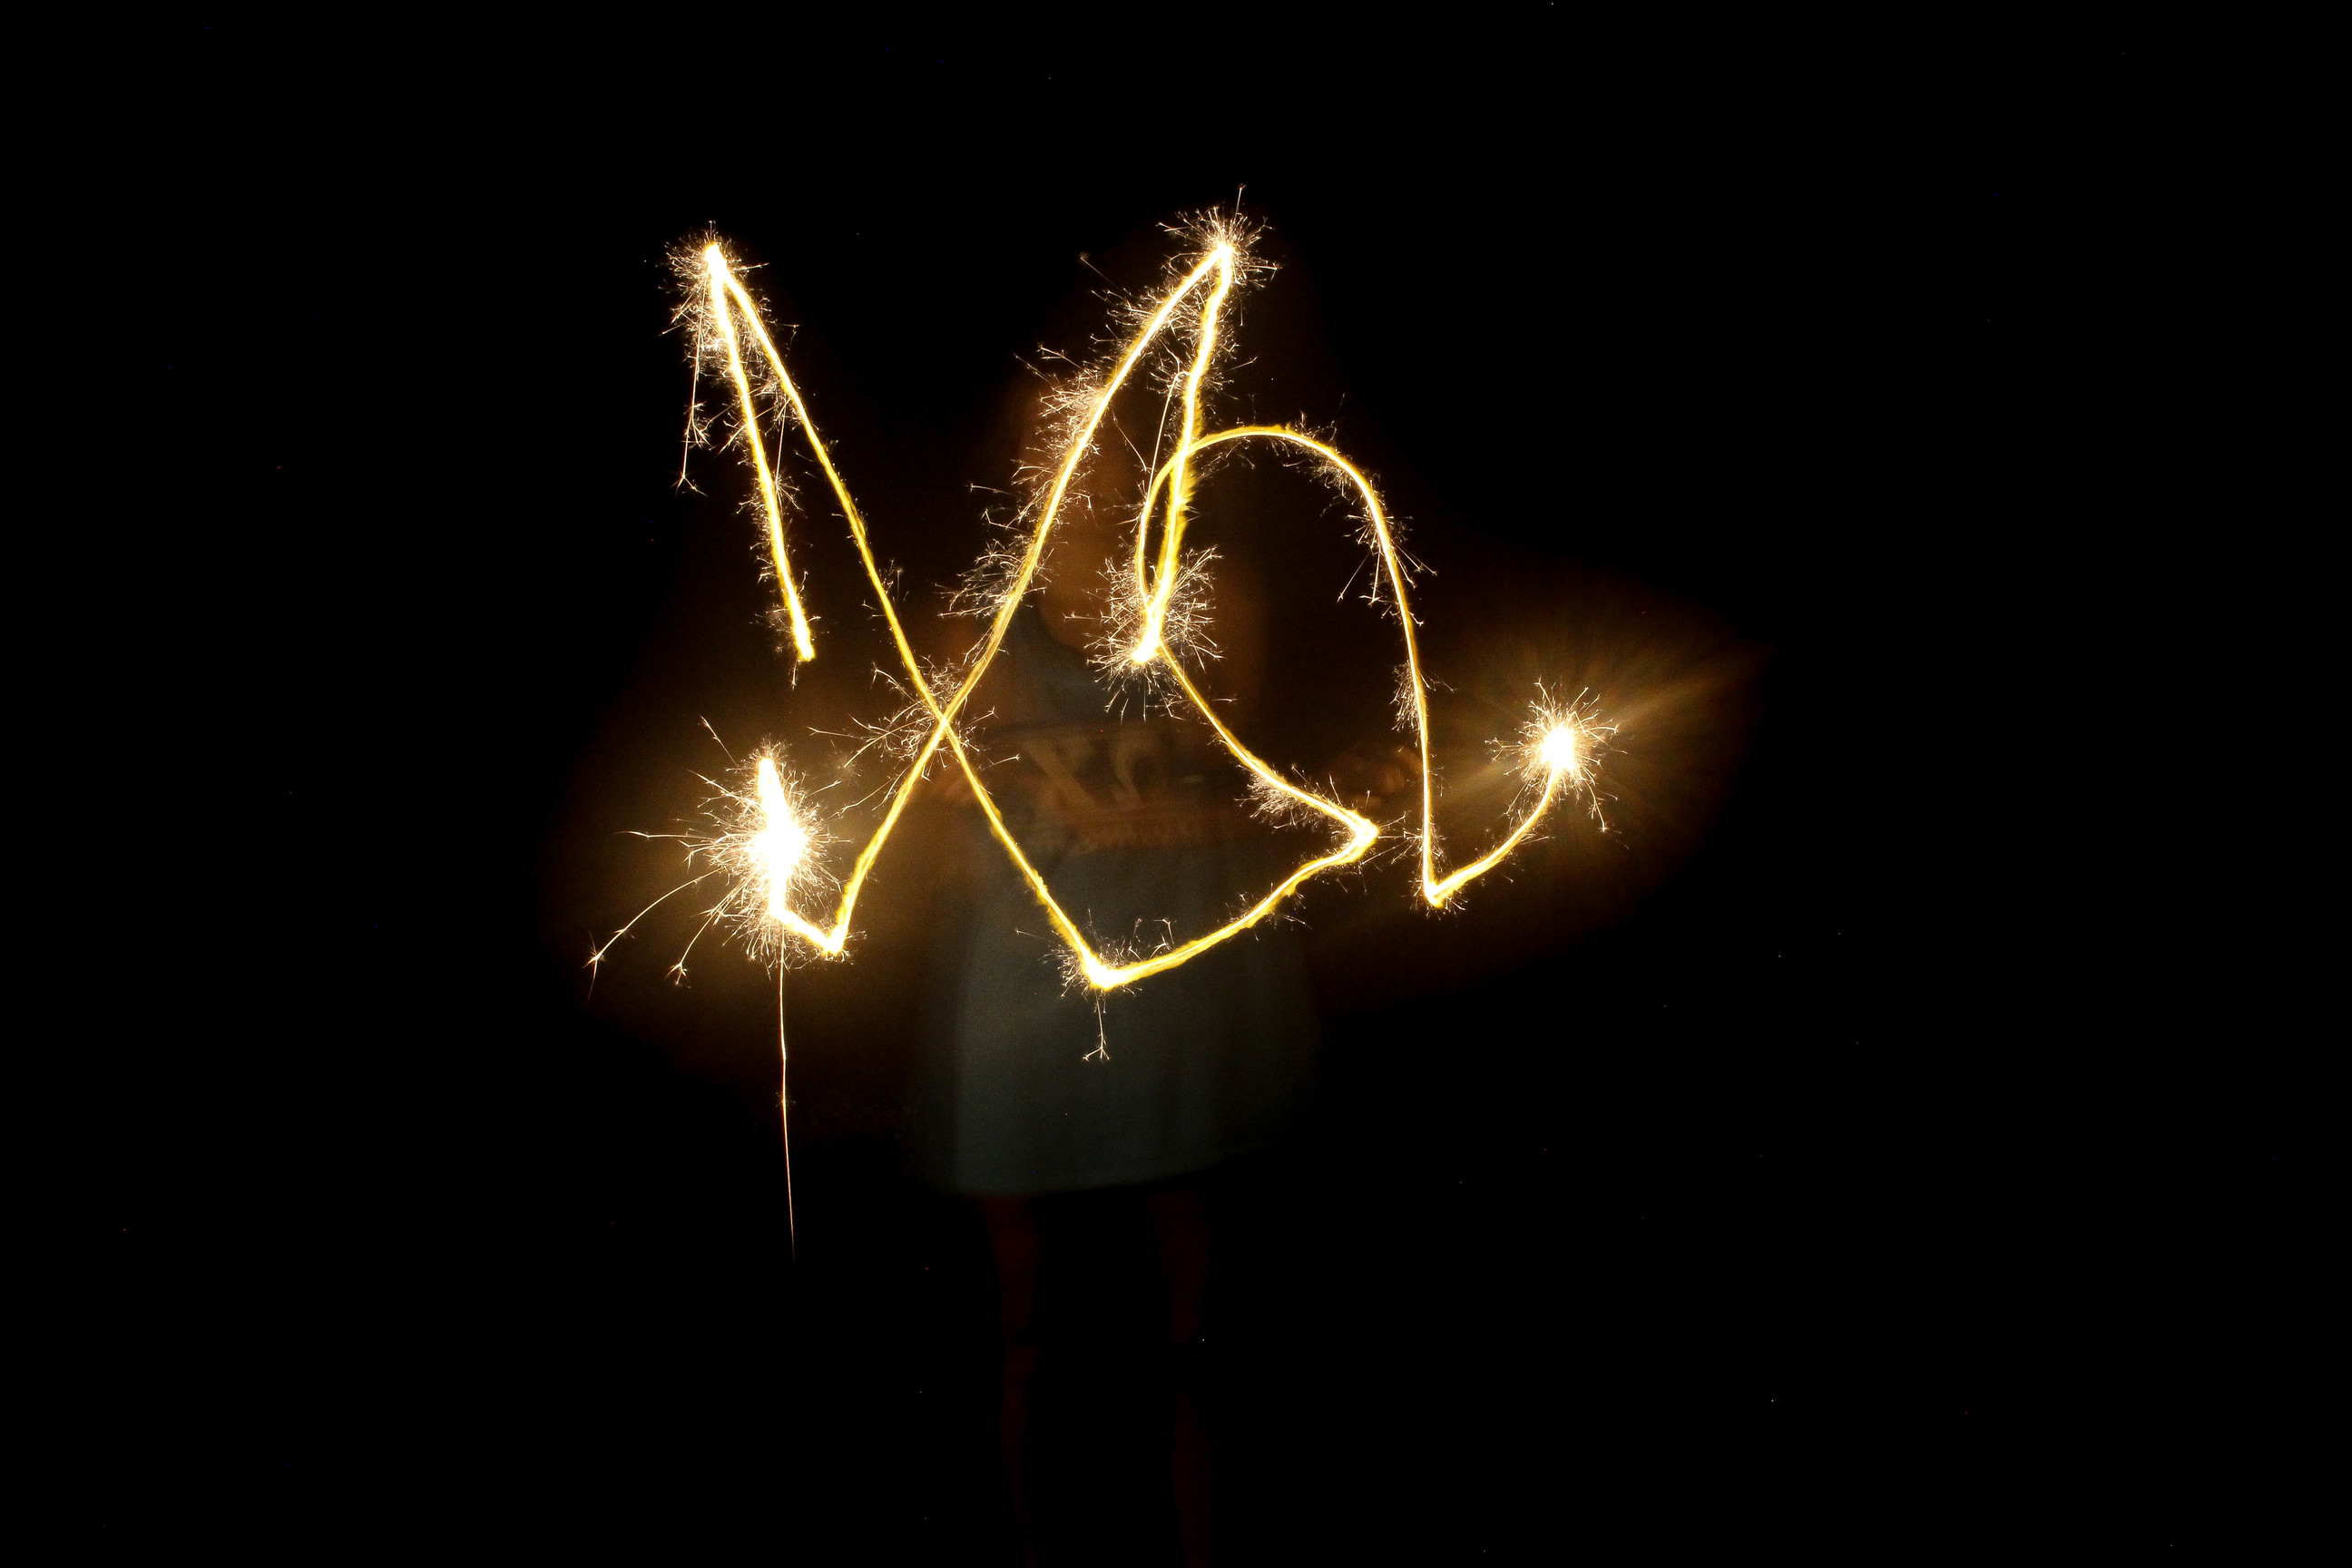 Fourth of July Recap, Write with sparklers, american girl by lauren lindmark on daily dose of charm